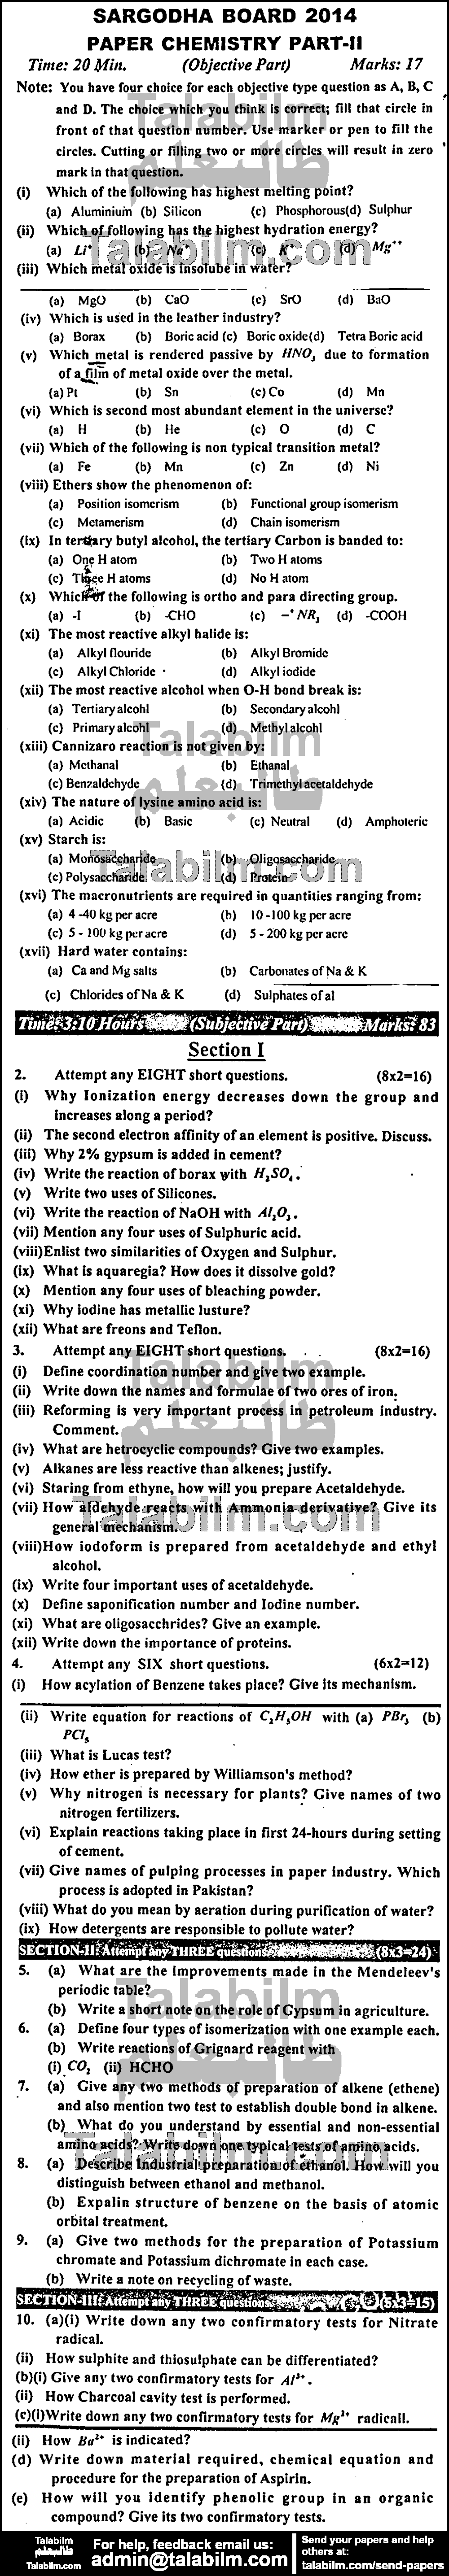 Chemistry 0 past paper for Group-II 2014